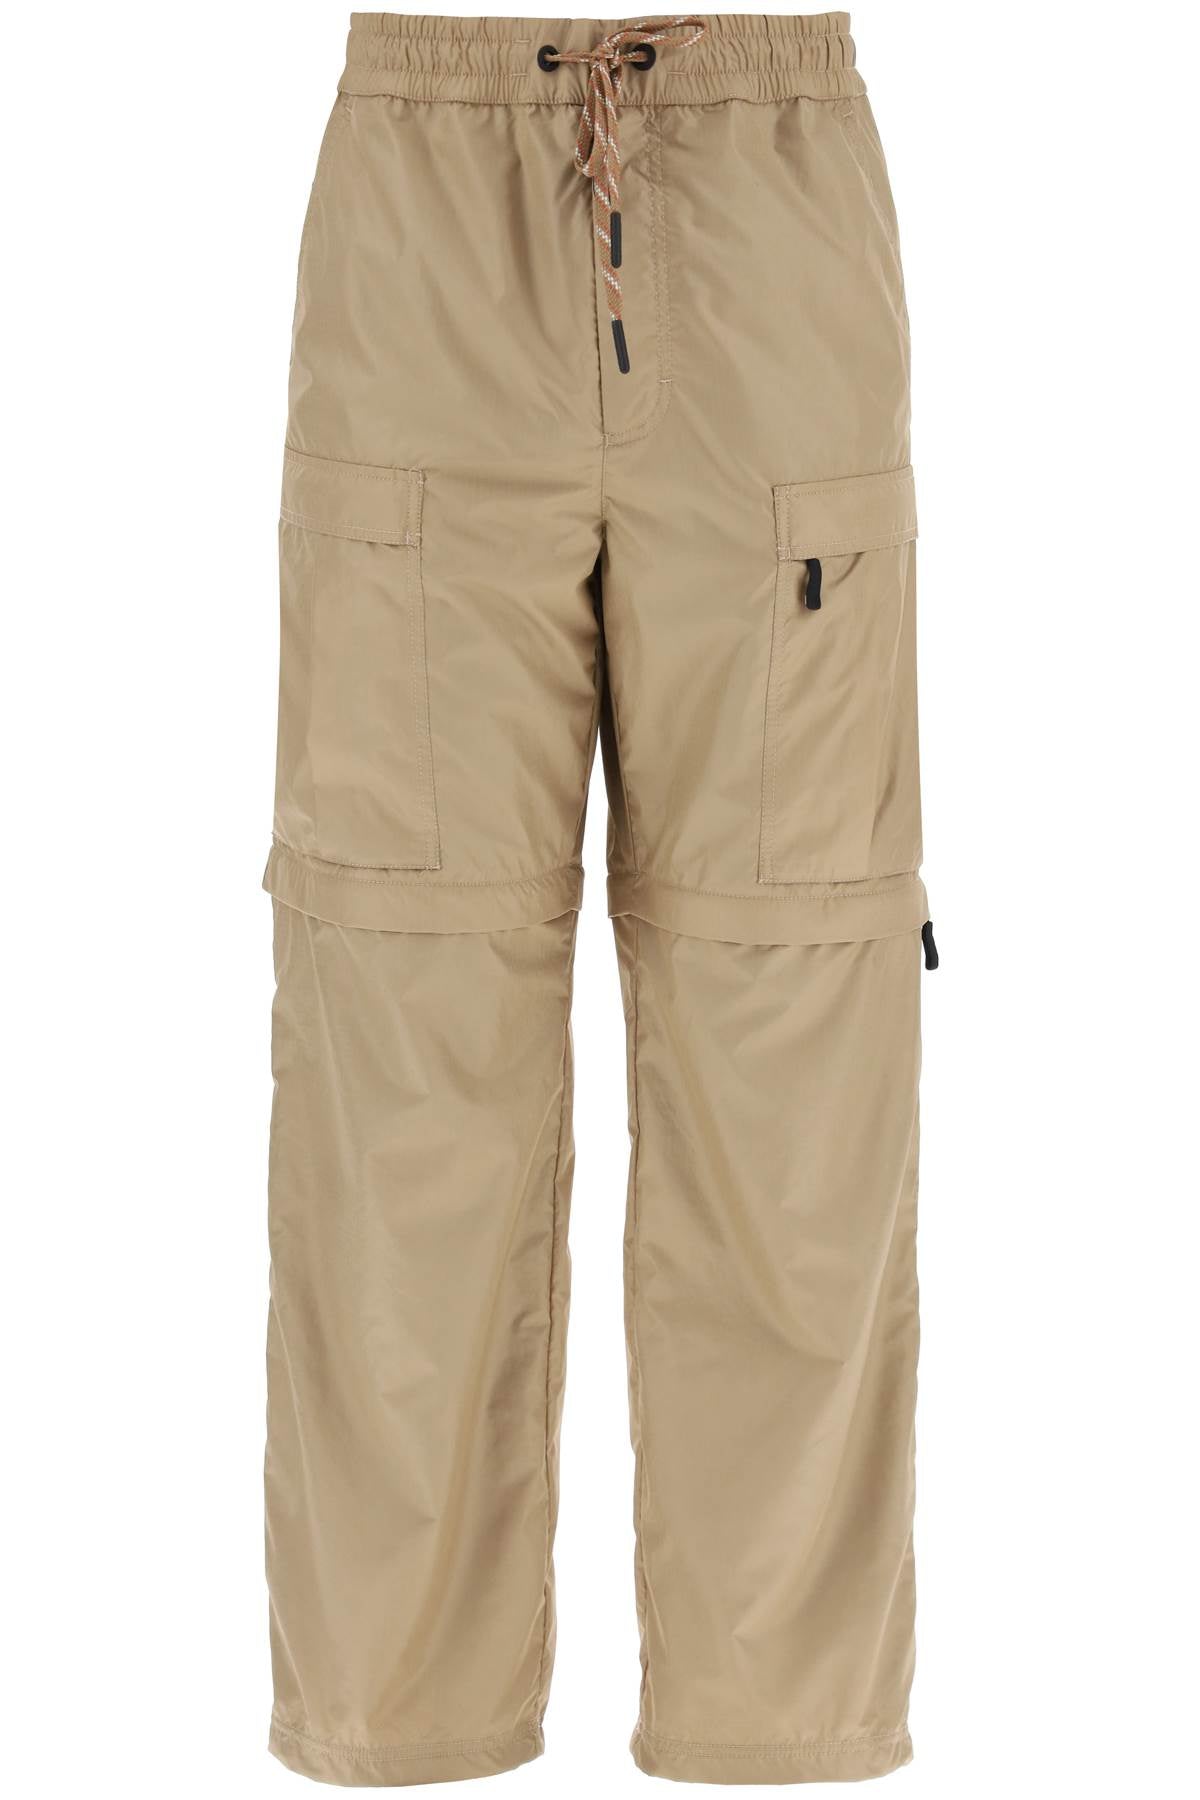 MONCLER GRENOBLE Convertible Ripstop Pants from the Day-namic Collection for Men in Tan